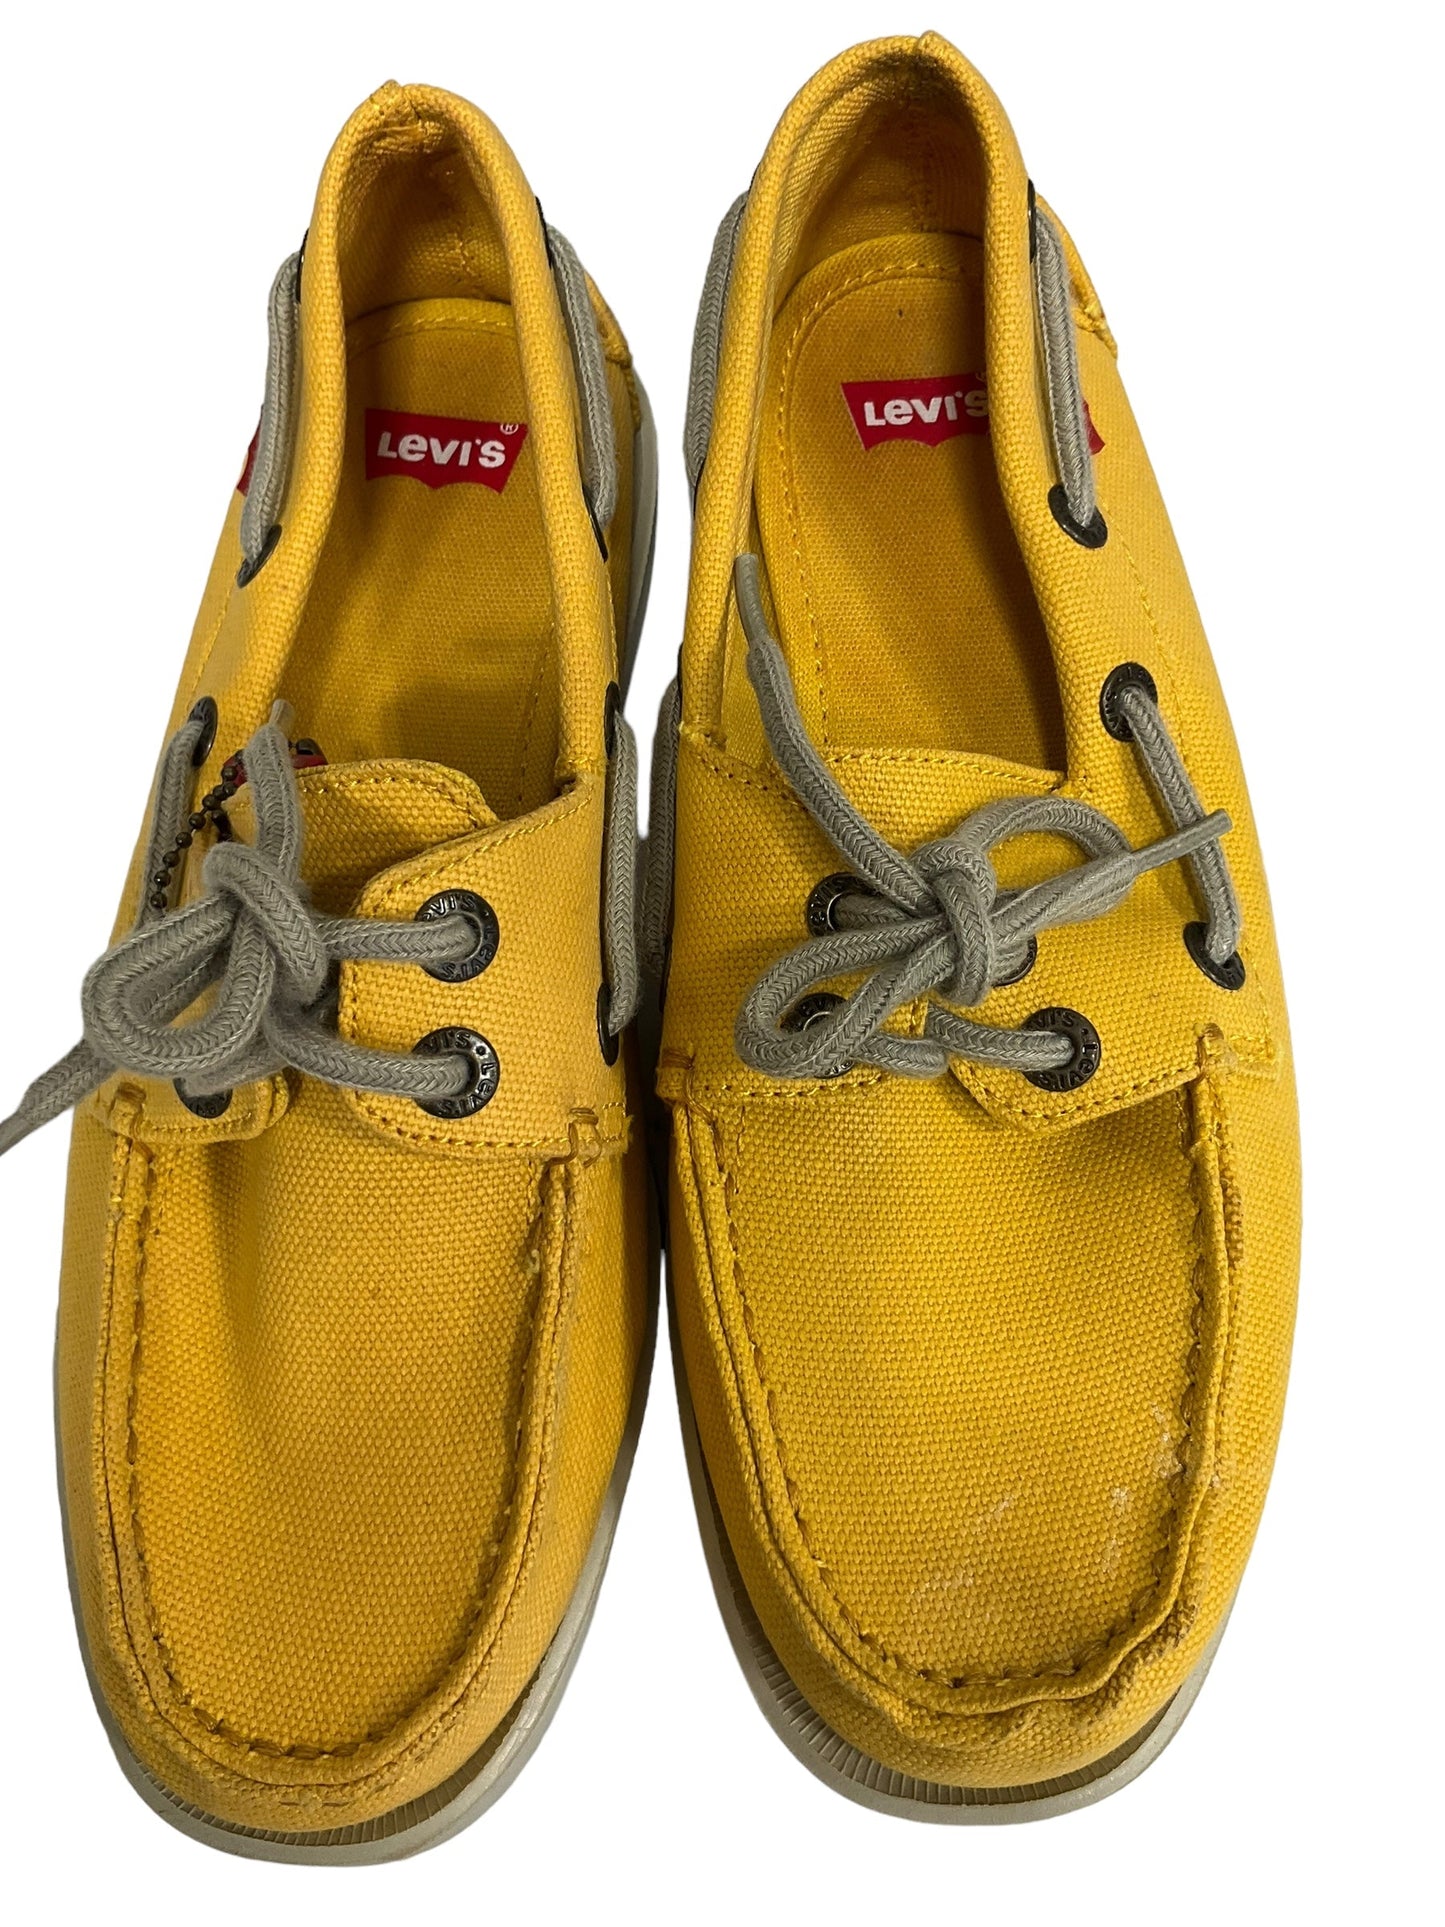 Yellow Shoes Flats Levis, Size 8